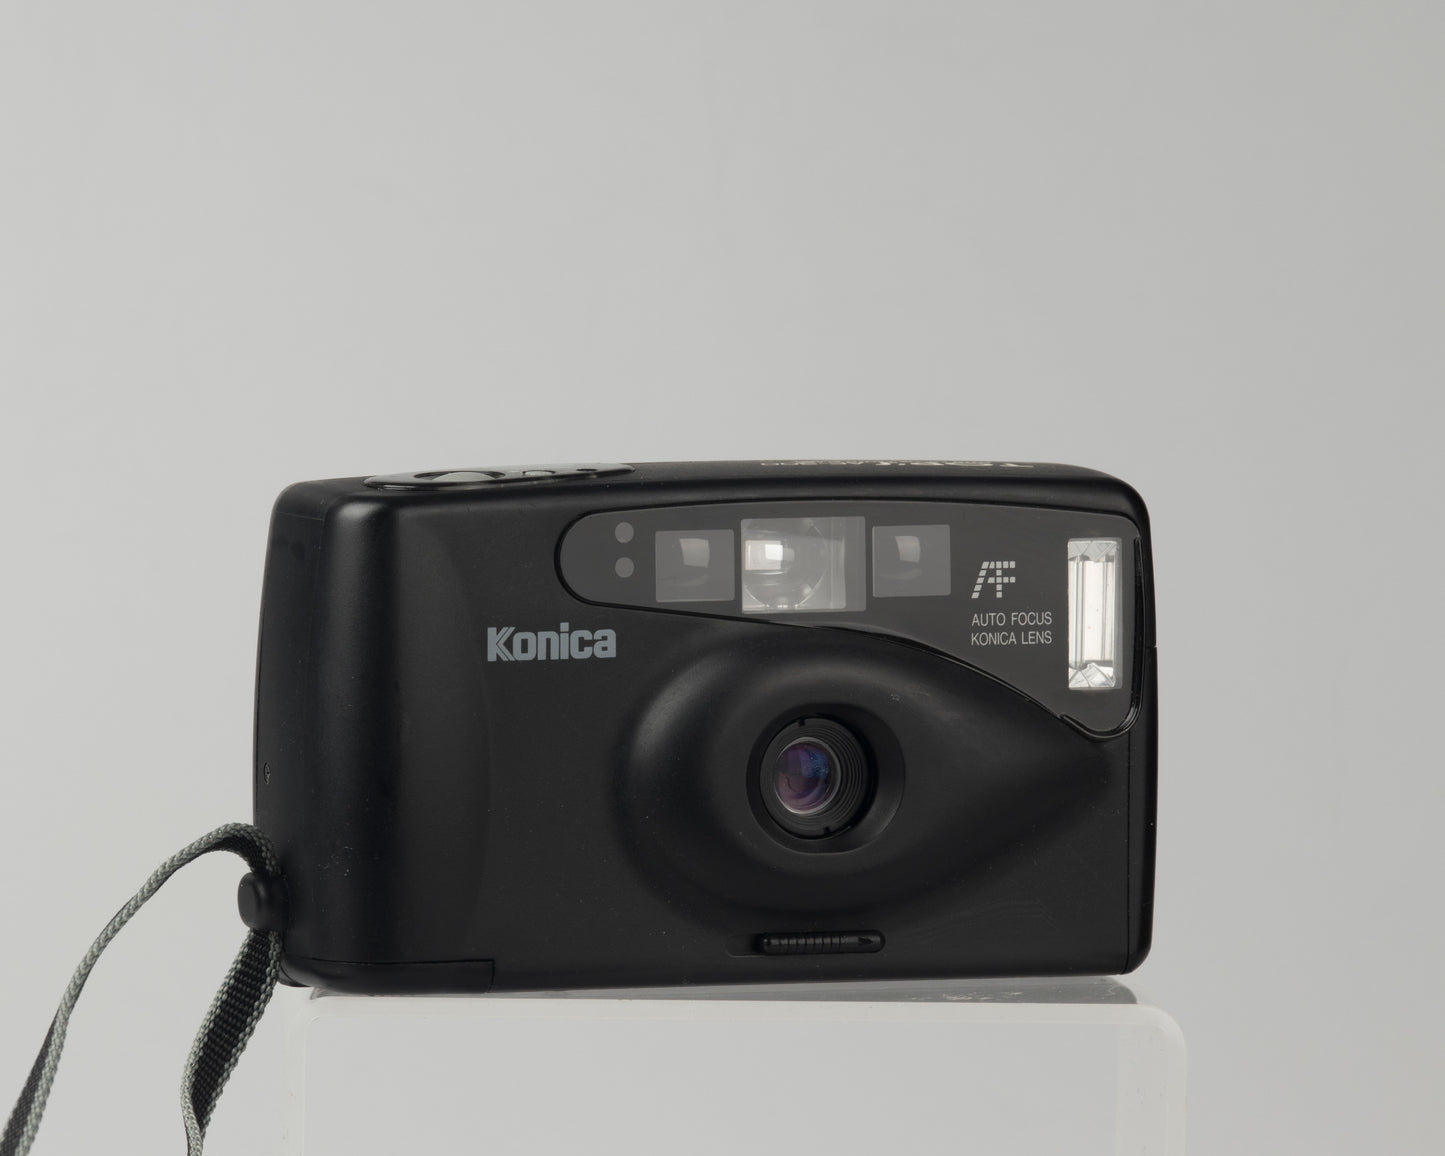 Konica TOP's AF-300 35mm point-and-shoot camera